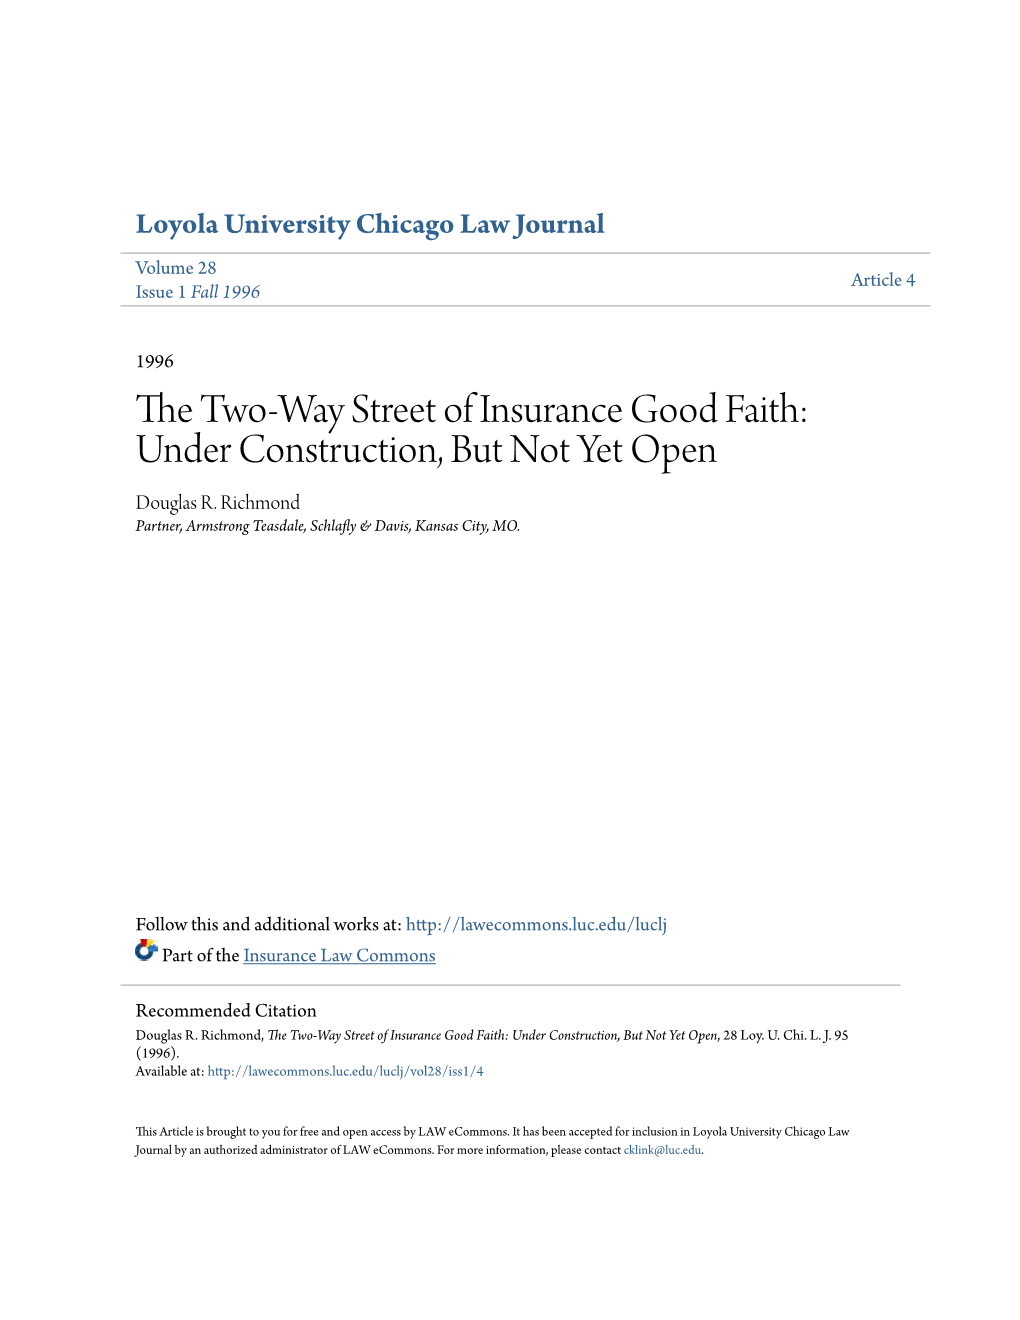 The Two-Way Street of Insurance Good Faith: Under Construction, but Not Yet Open Douglas R